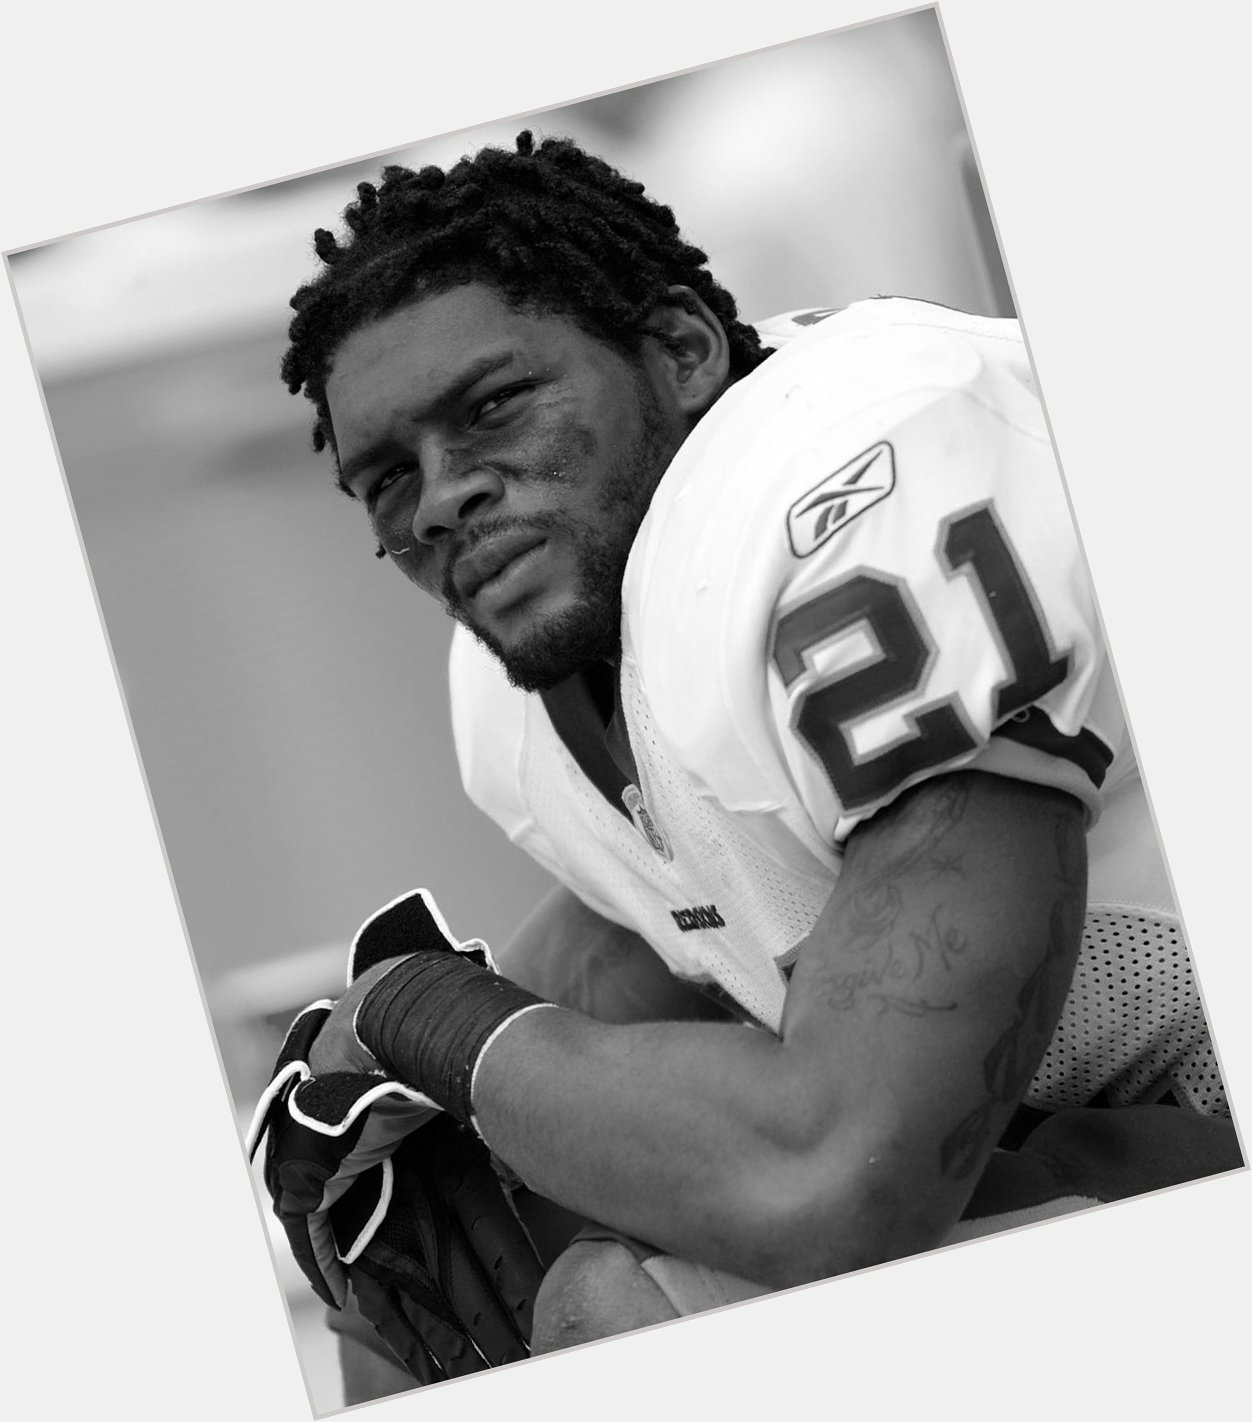 Happy Birthday Sean Taylor, 38. Rest in power with the Great I am.     